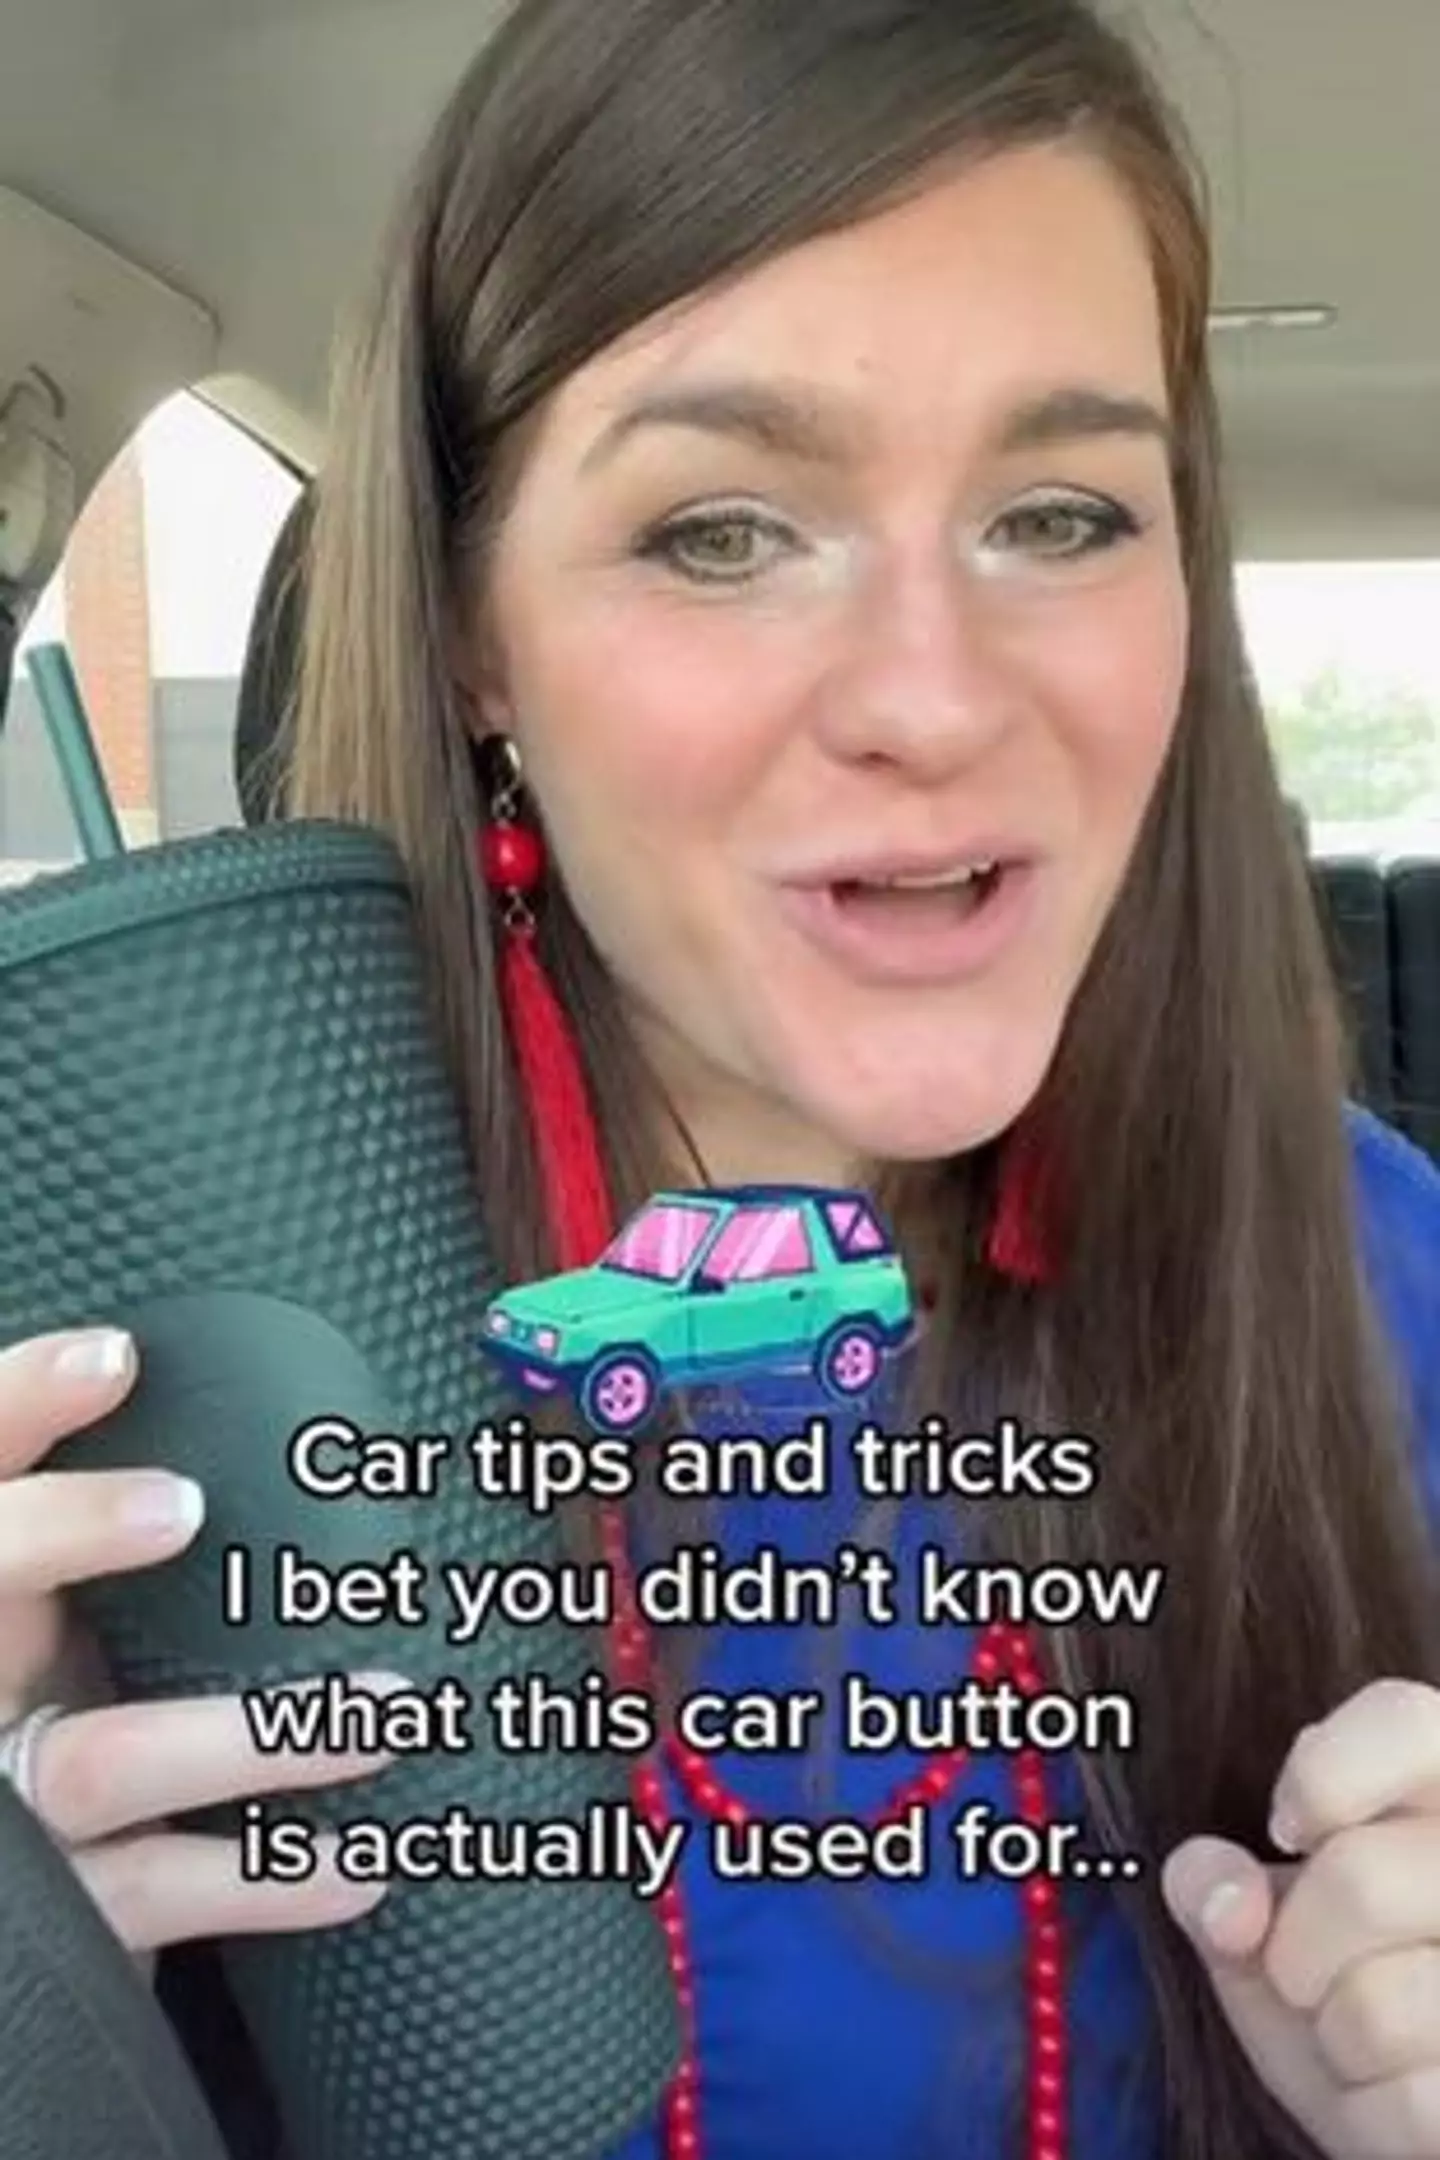 "If you're sitting in front of other cars where you'll be getting all the exhaust fumes sucked into your car, you use this button so that the air inside your car recirculates and you don't suck in all that bad air."